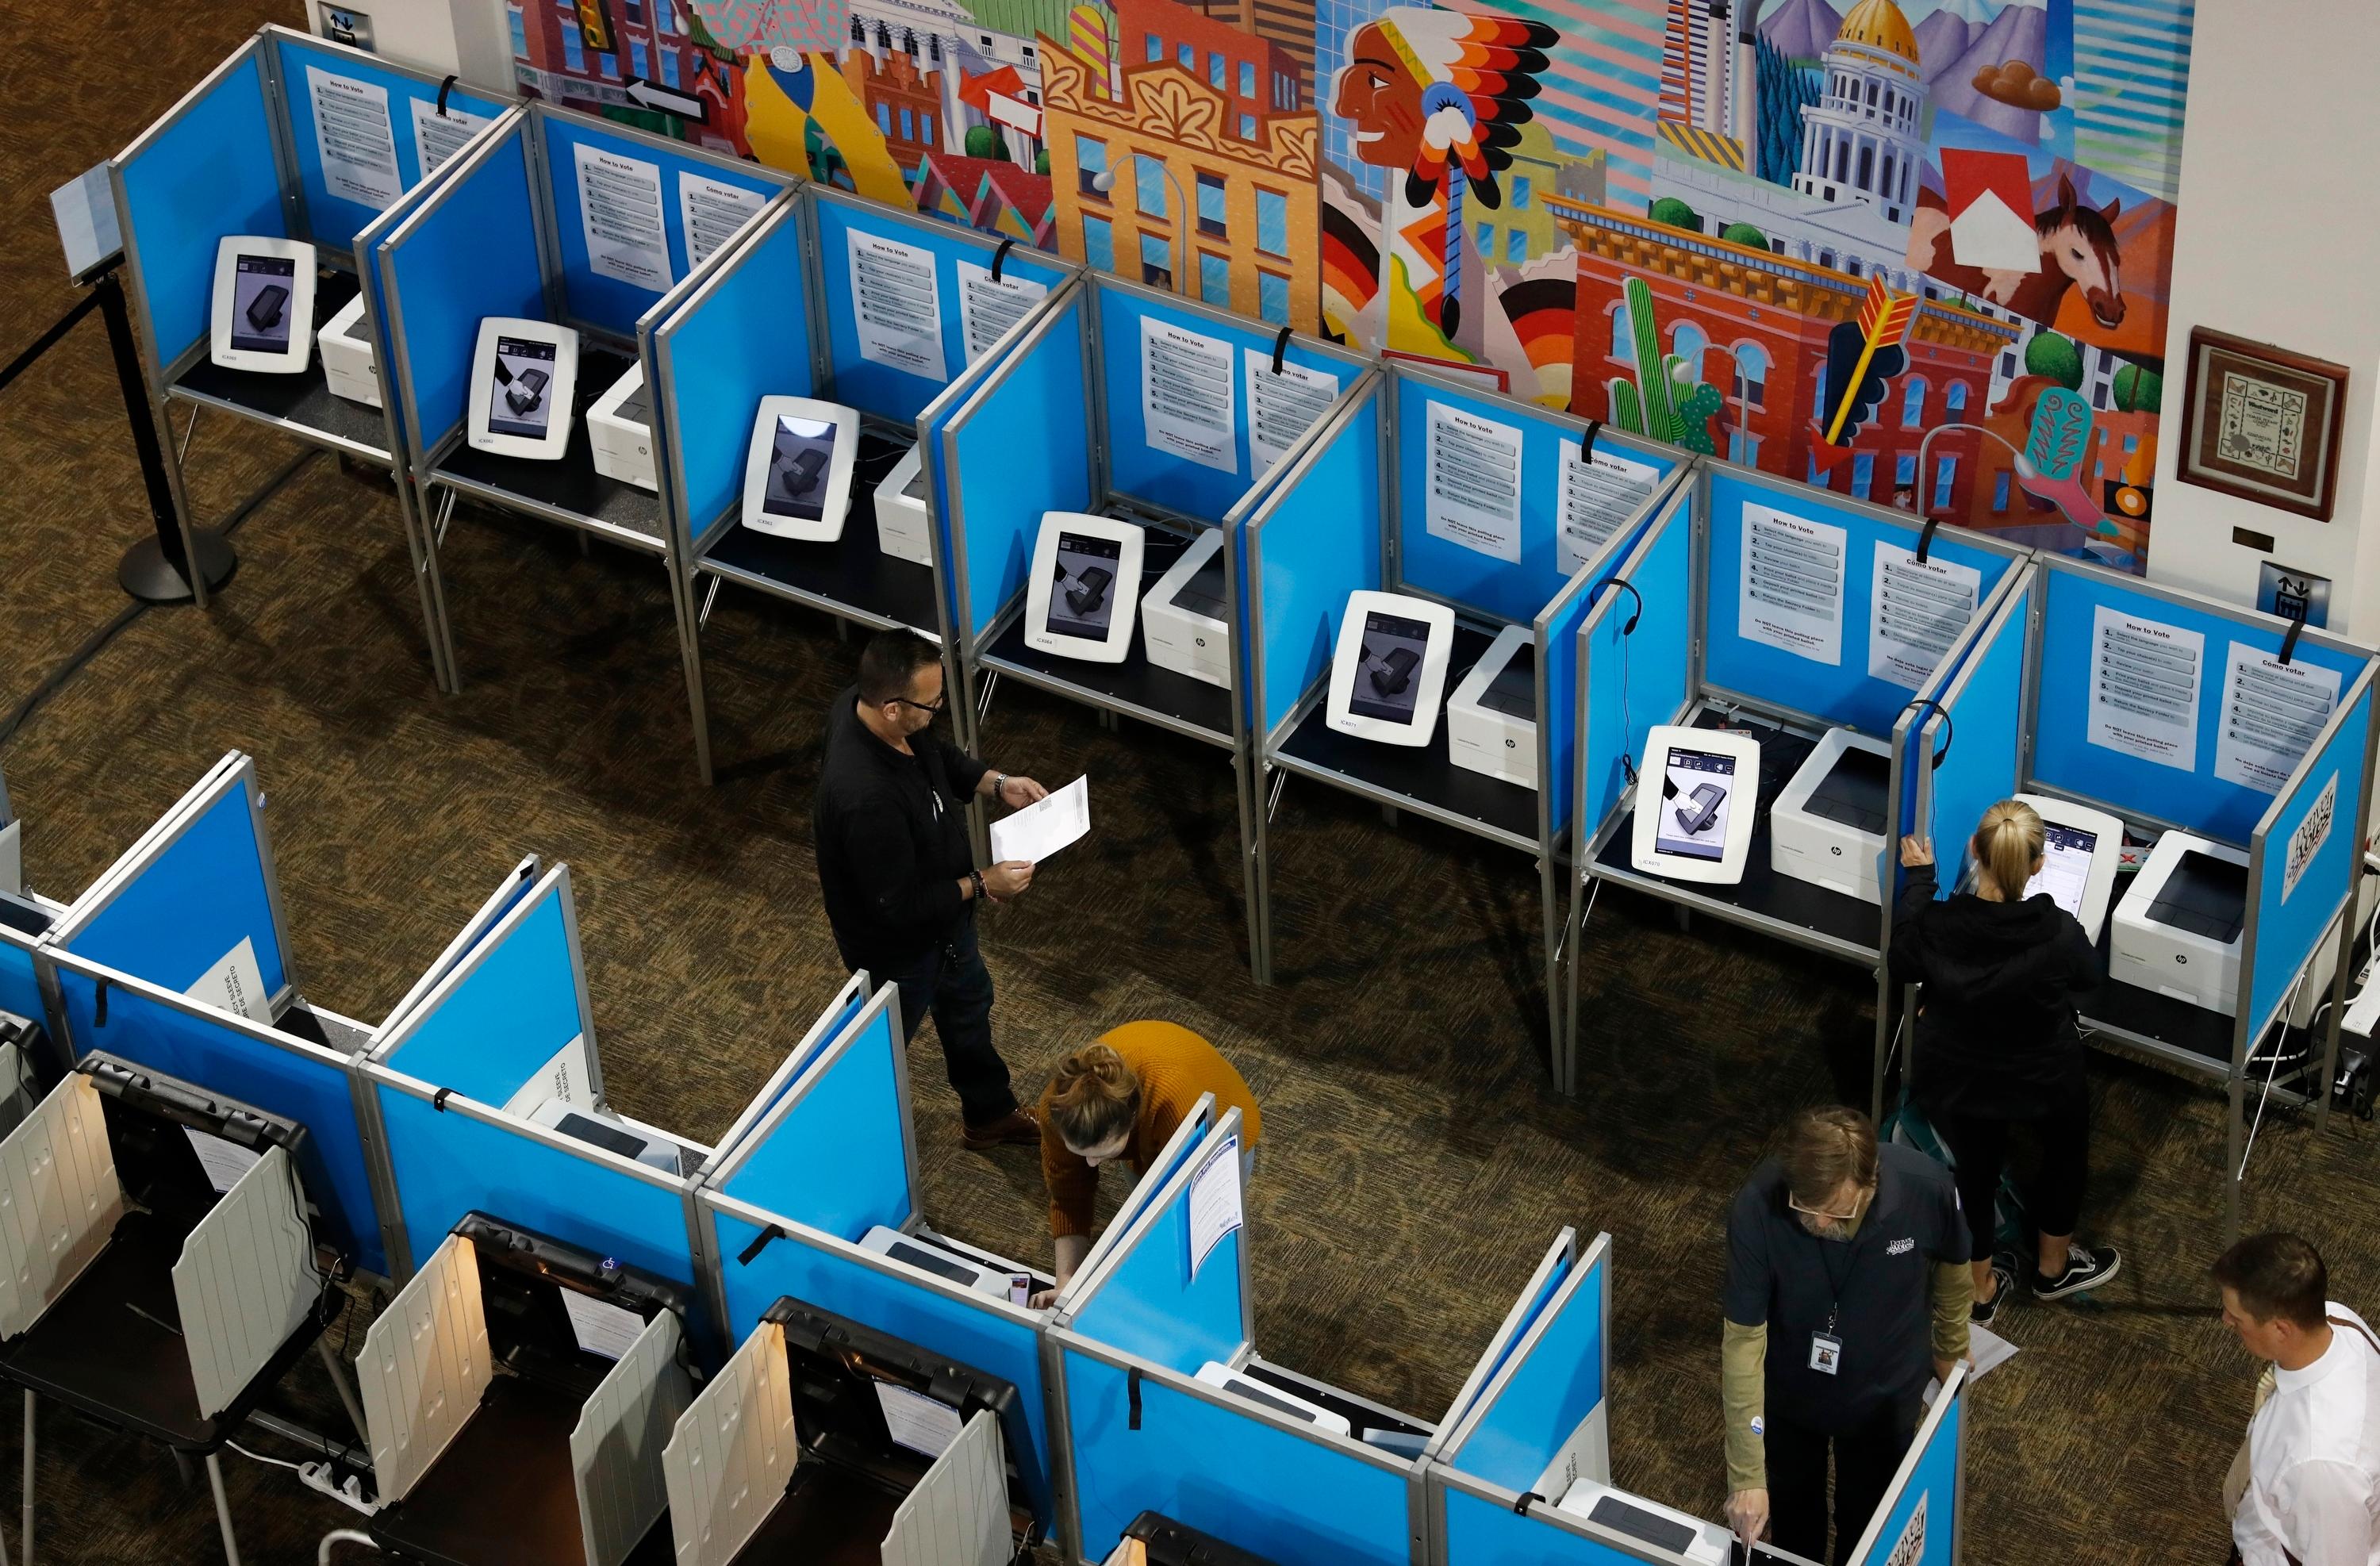 Voters fill out their ballots at the Denver Elections Division Tuesday, May 7, 2019, in Denver.